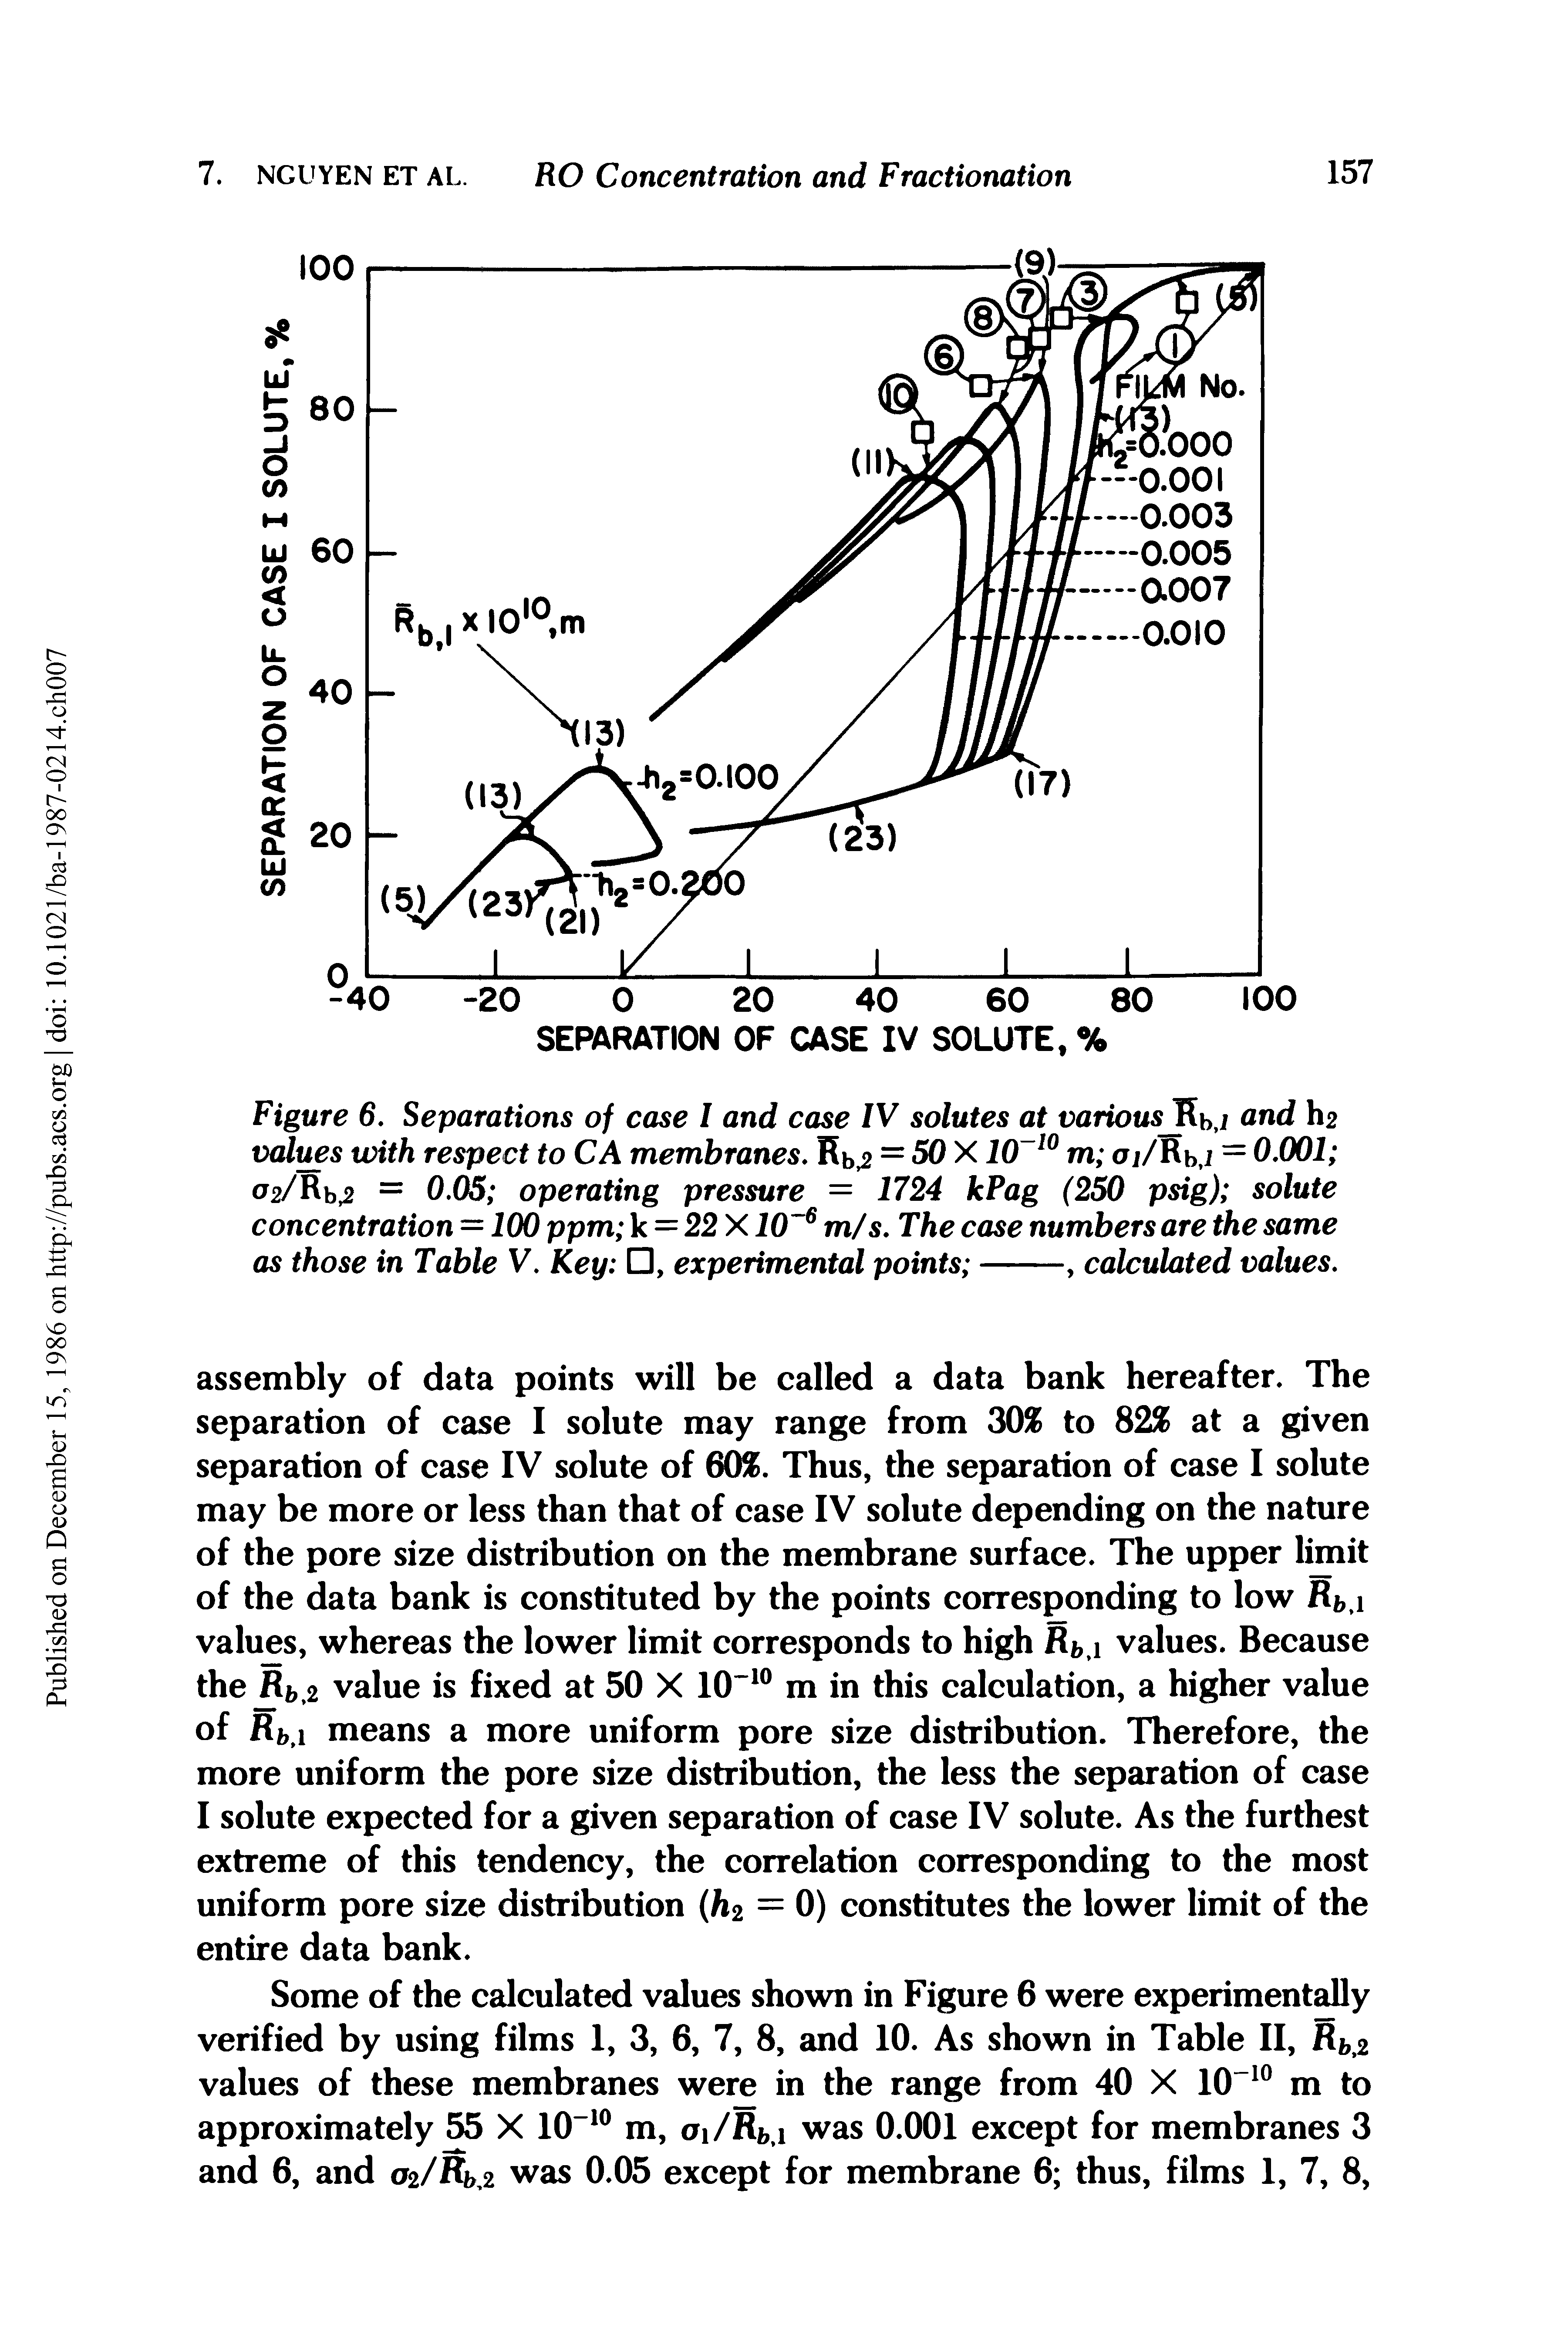 Figure 6. Separations of case I and case IV solutes at various Kbj and h2 values with respect to CA membranes. Rb = 50 X 10 w m oi/Rb,i — 0.001 02/Rb.5 = 0.05 operating pressure = 1724 kPag (250 psig) solute concentration = 100 ppm k = 22 X JO 6 m/s. The case numbers are the same as those in Table V. Key , experimental points ----, calculated values.